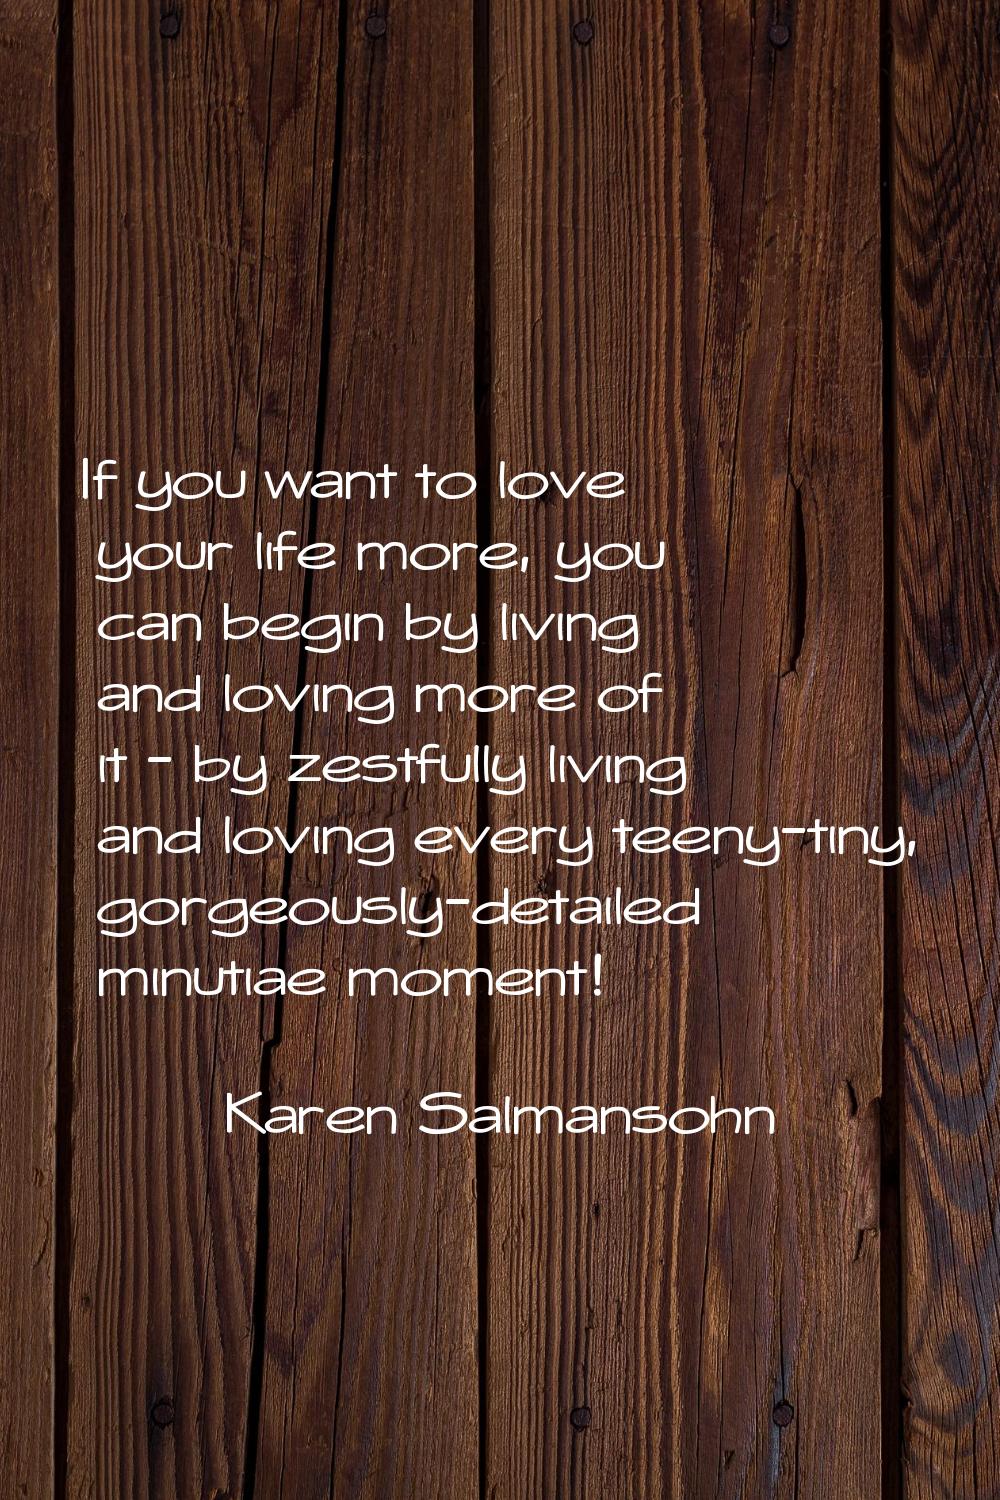 If you want to love your life more, you can begin by living and loving more of it - by zestfully li